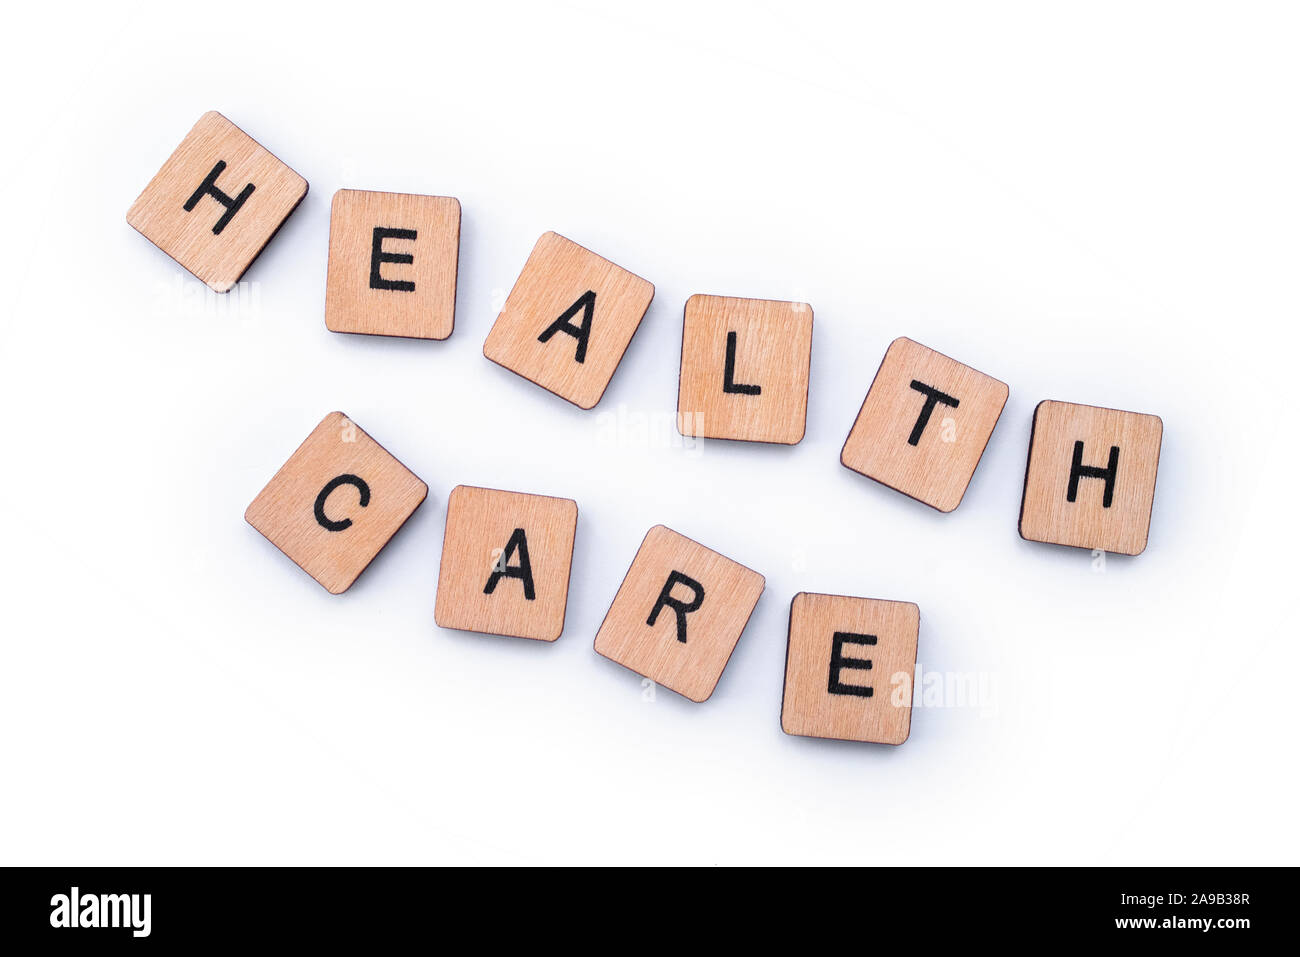 HEALTH CARE, spelt with wooden letter tiles. Stock Photo